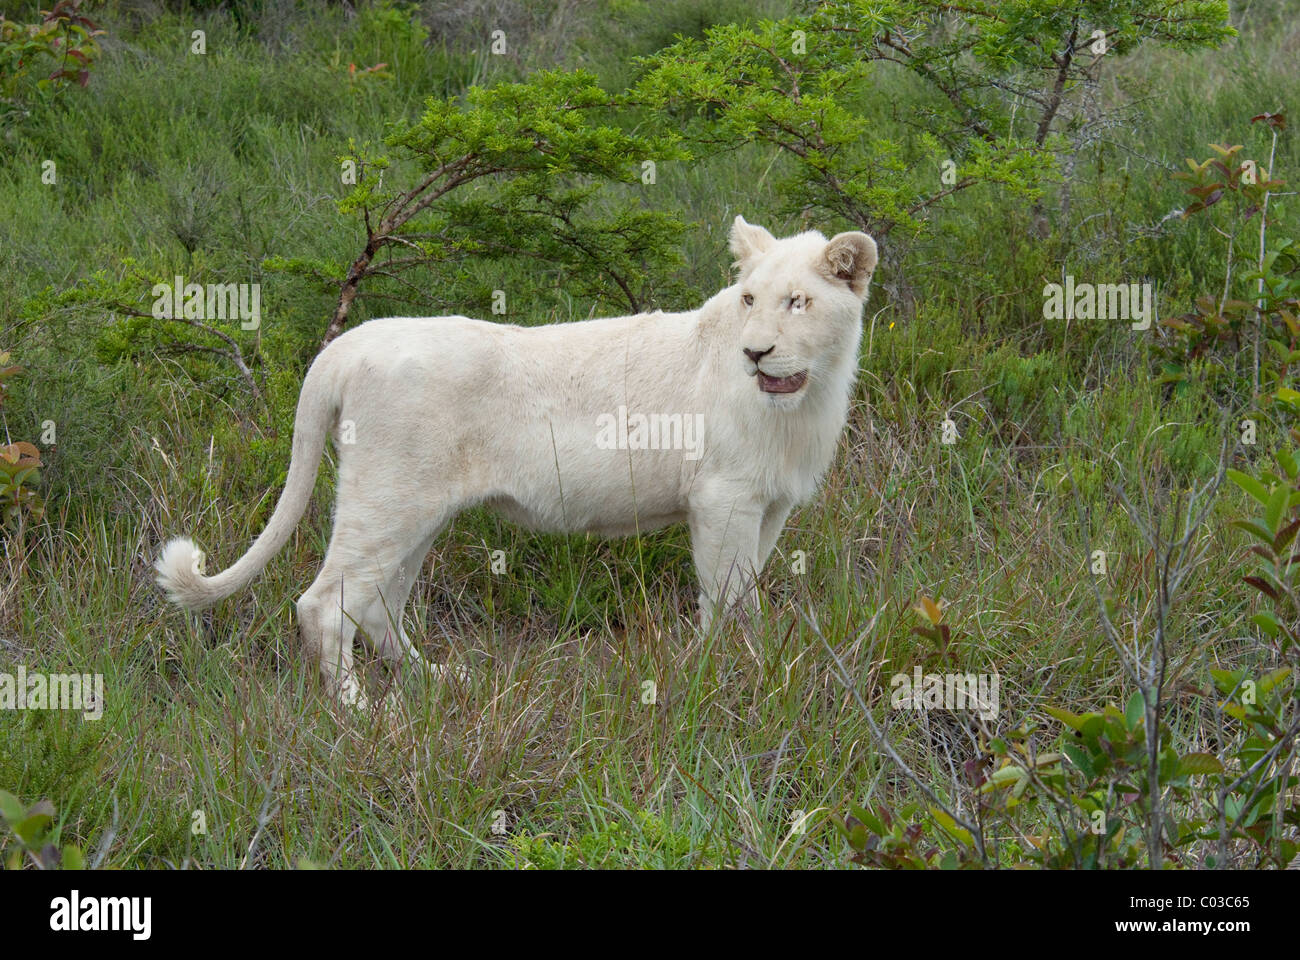 South Africa, East London, Inkwenkwezi Private Game Reserve. African lion (Wild: Panthera leo), unique white lion cub. Stock Photo